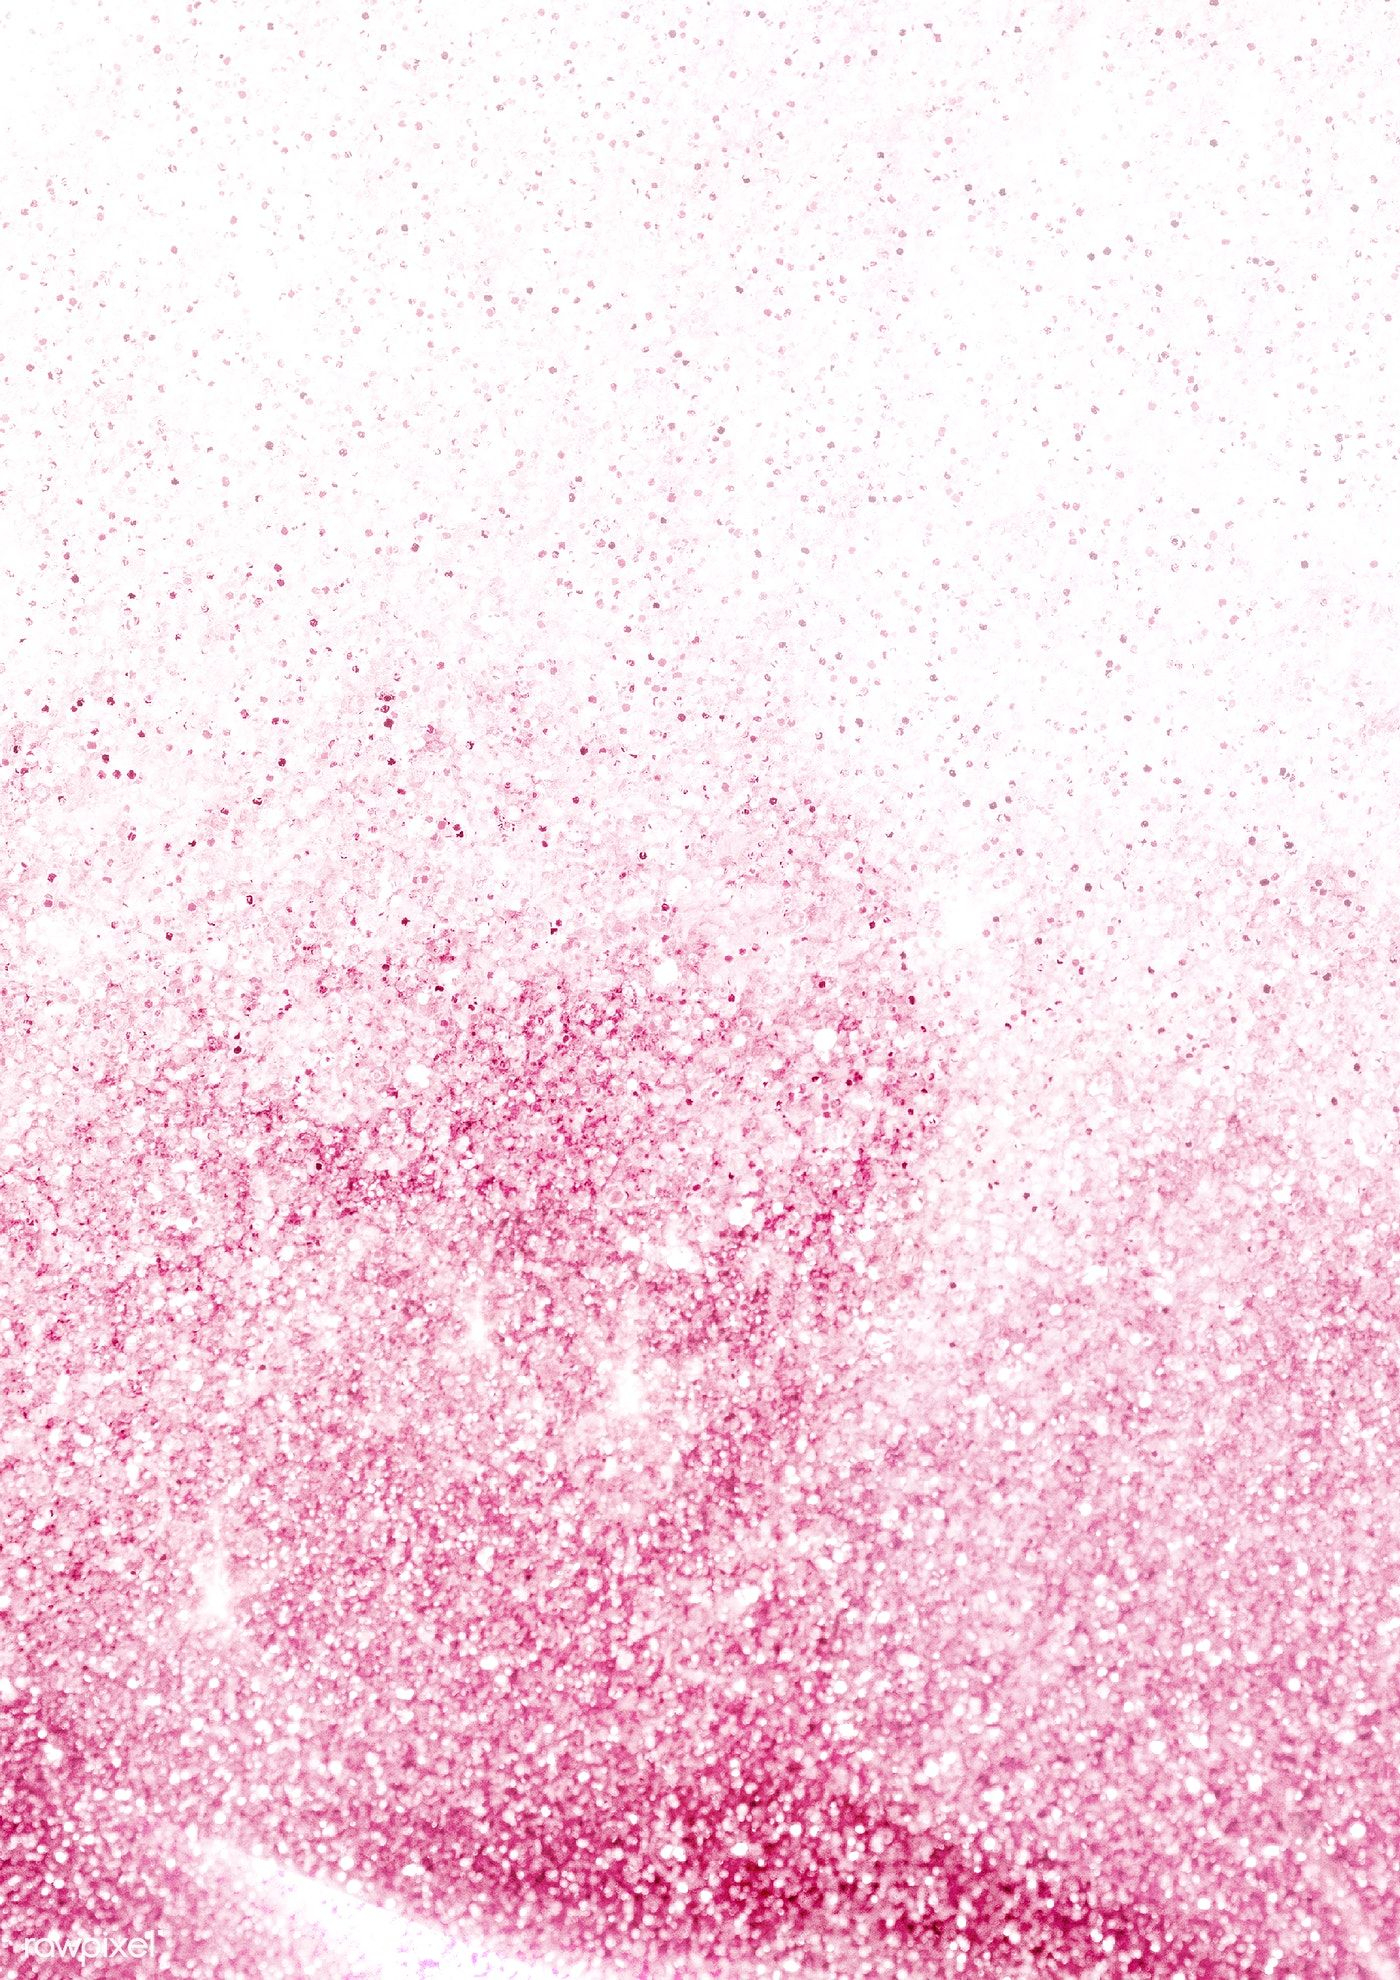 1400x1980 Pink ombre glitter textured background | premium image by / katie | Pink sparkle background, Blue glitter background, Textured background